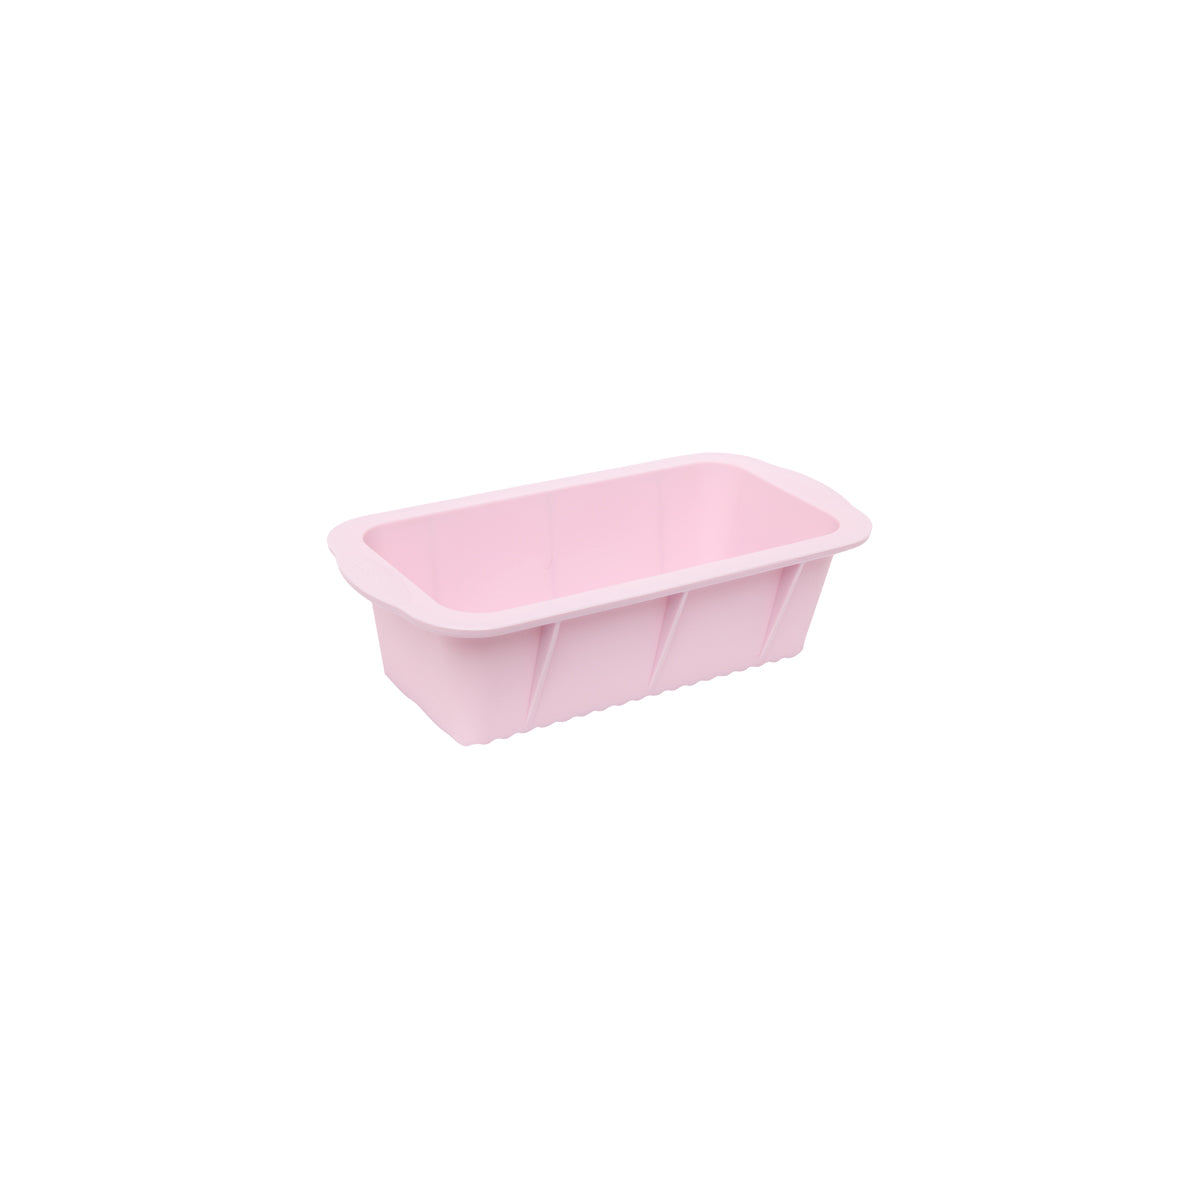 WLTW3225 WILTSHIRE Silicone Loaf Pan Tomkin Australia Hospitality Supplies